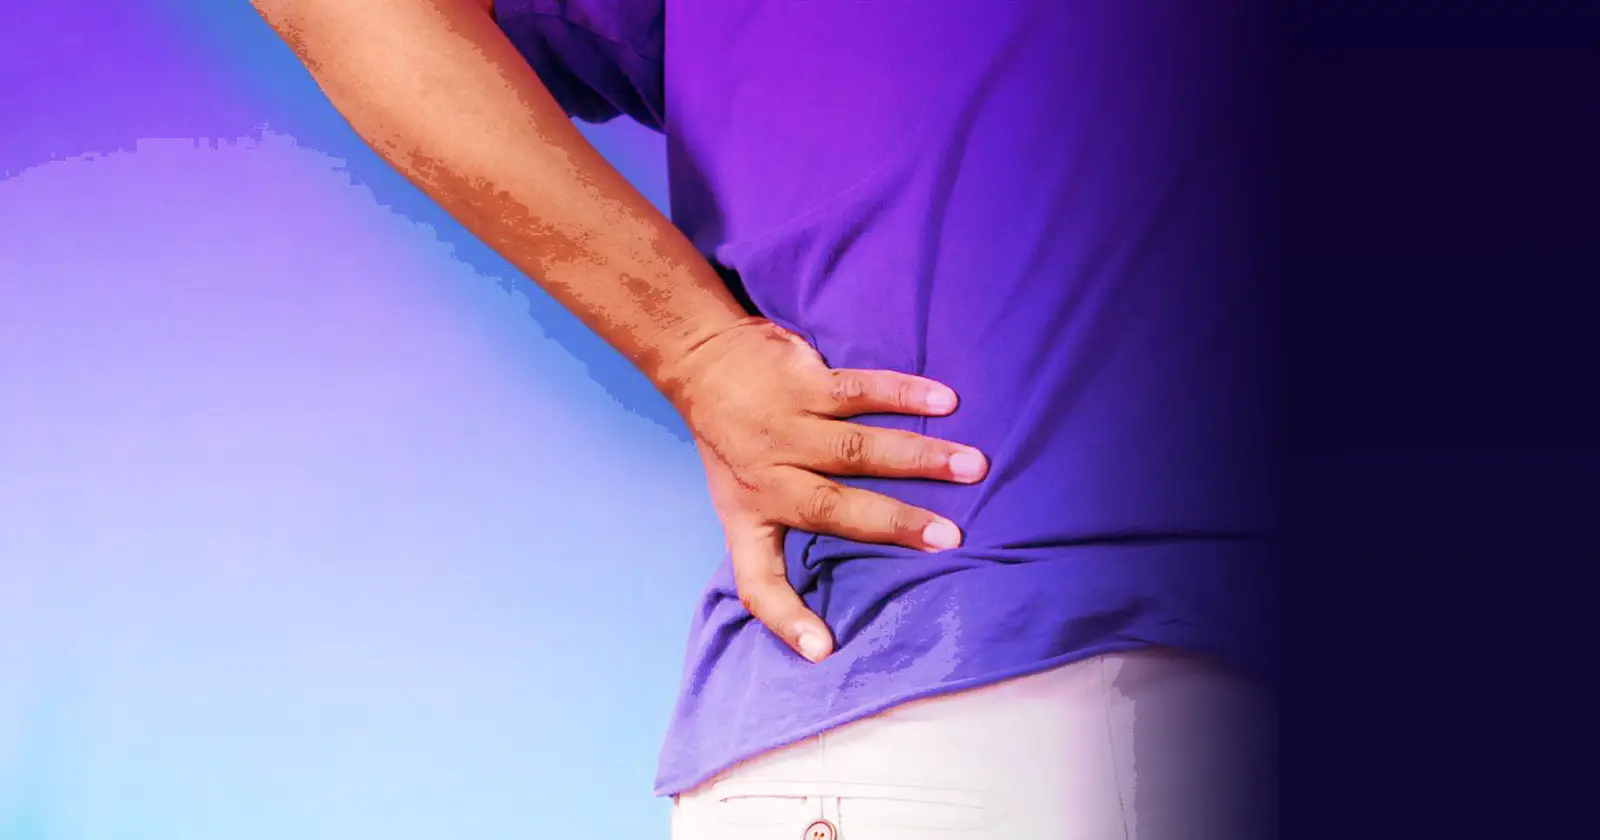 Can I Golf With A Herniated Disc